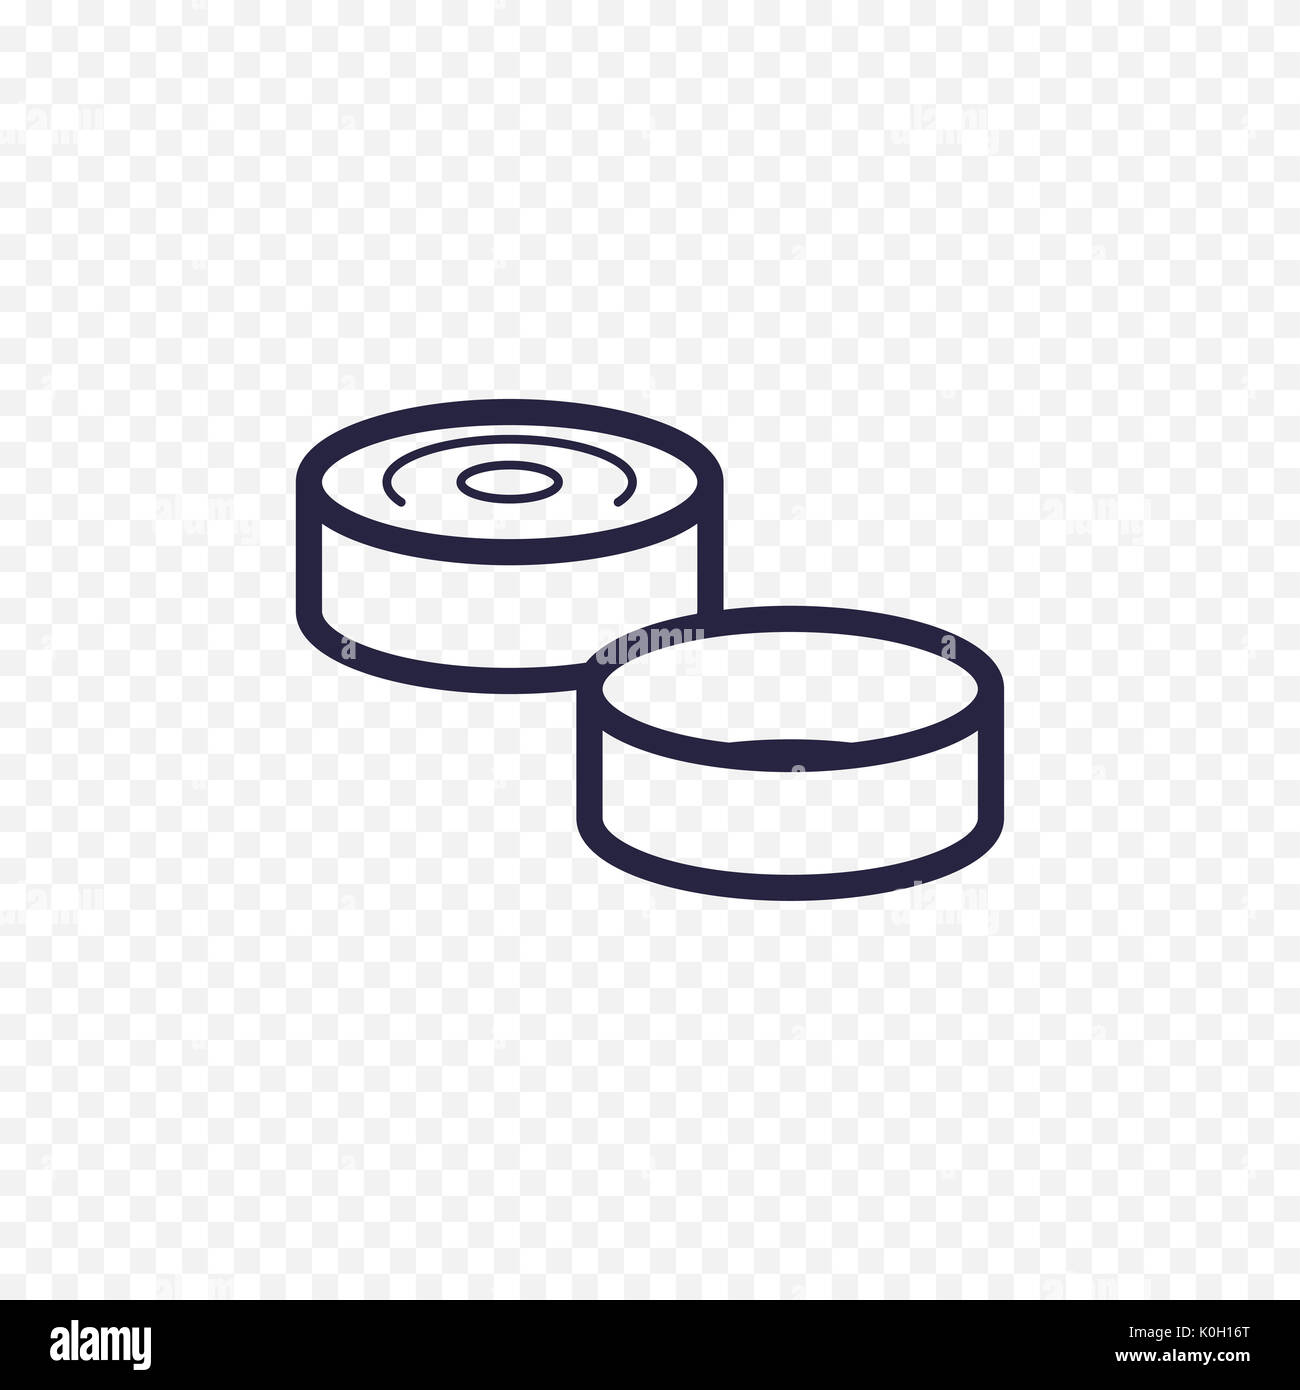 Game of checkers line icon. Checkers figure thin linear signs for websites, infographic, mobile applications. Stock Photo